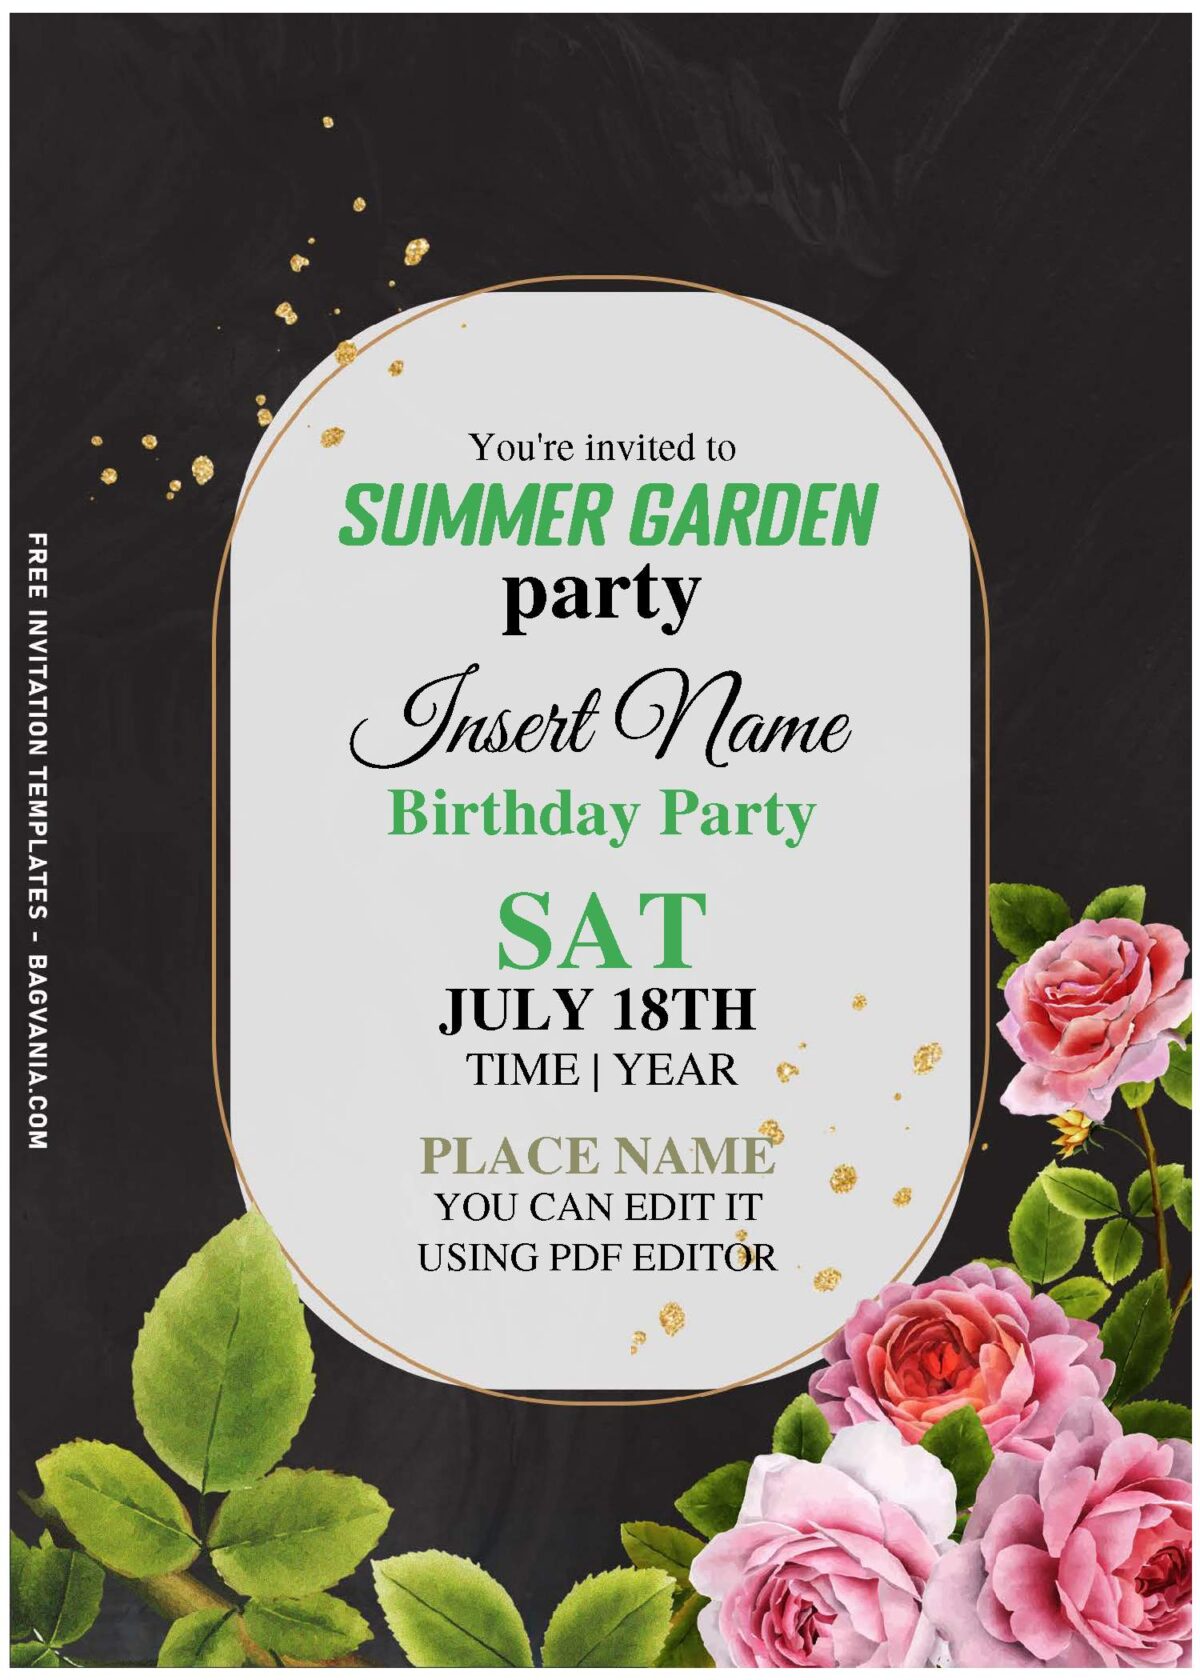 (Free Editable PDF) Gleaming Gold And Delicate Pink Roses Birthday Invitation Templates with dark background